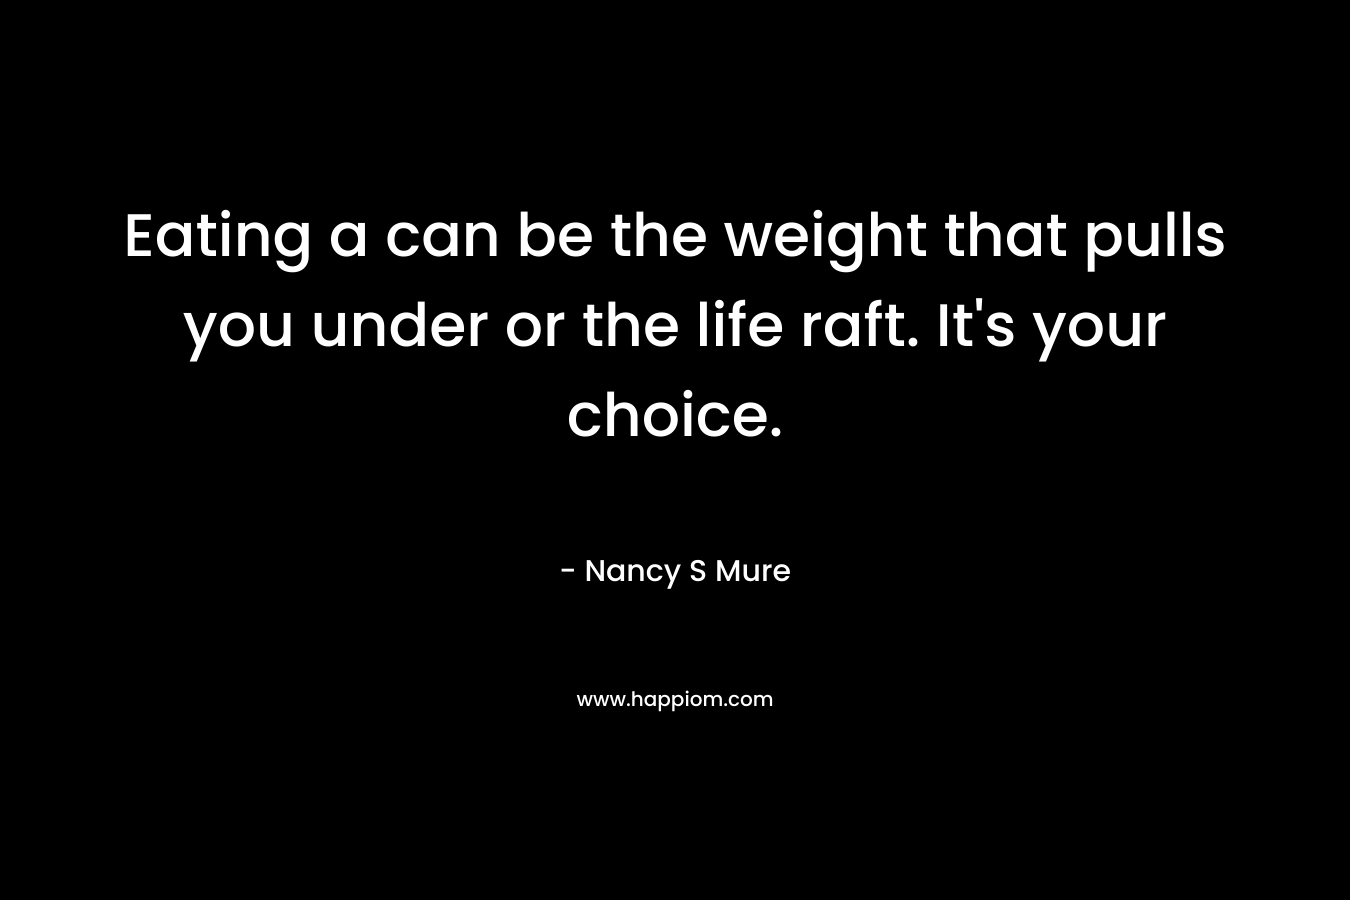 Eating a can be the weight that pulls you under or the life raft. It’s your choice. – Nancy S Mure